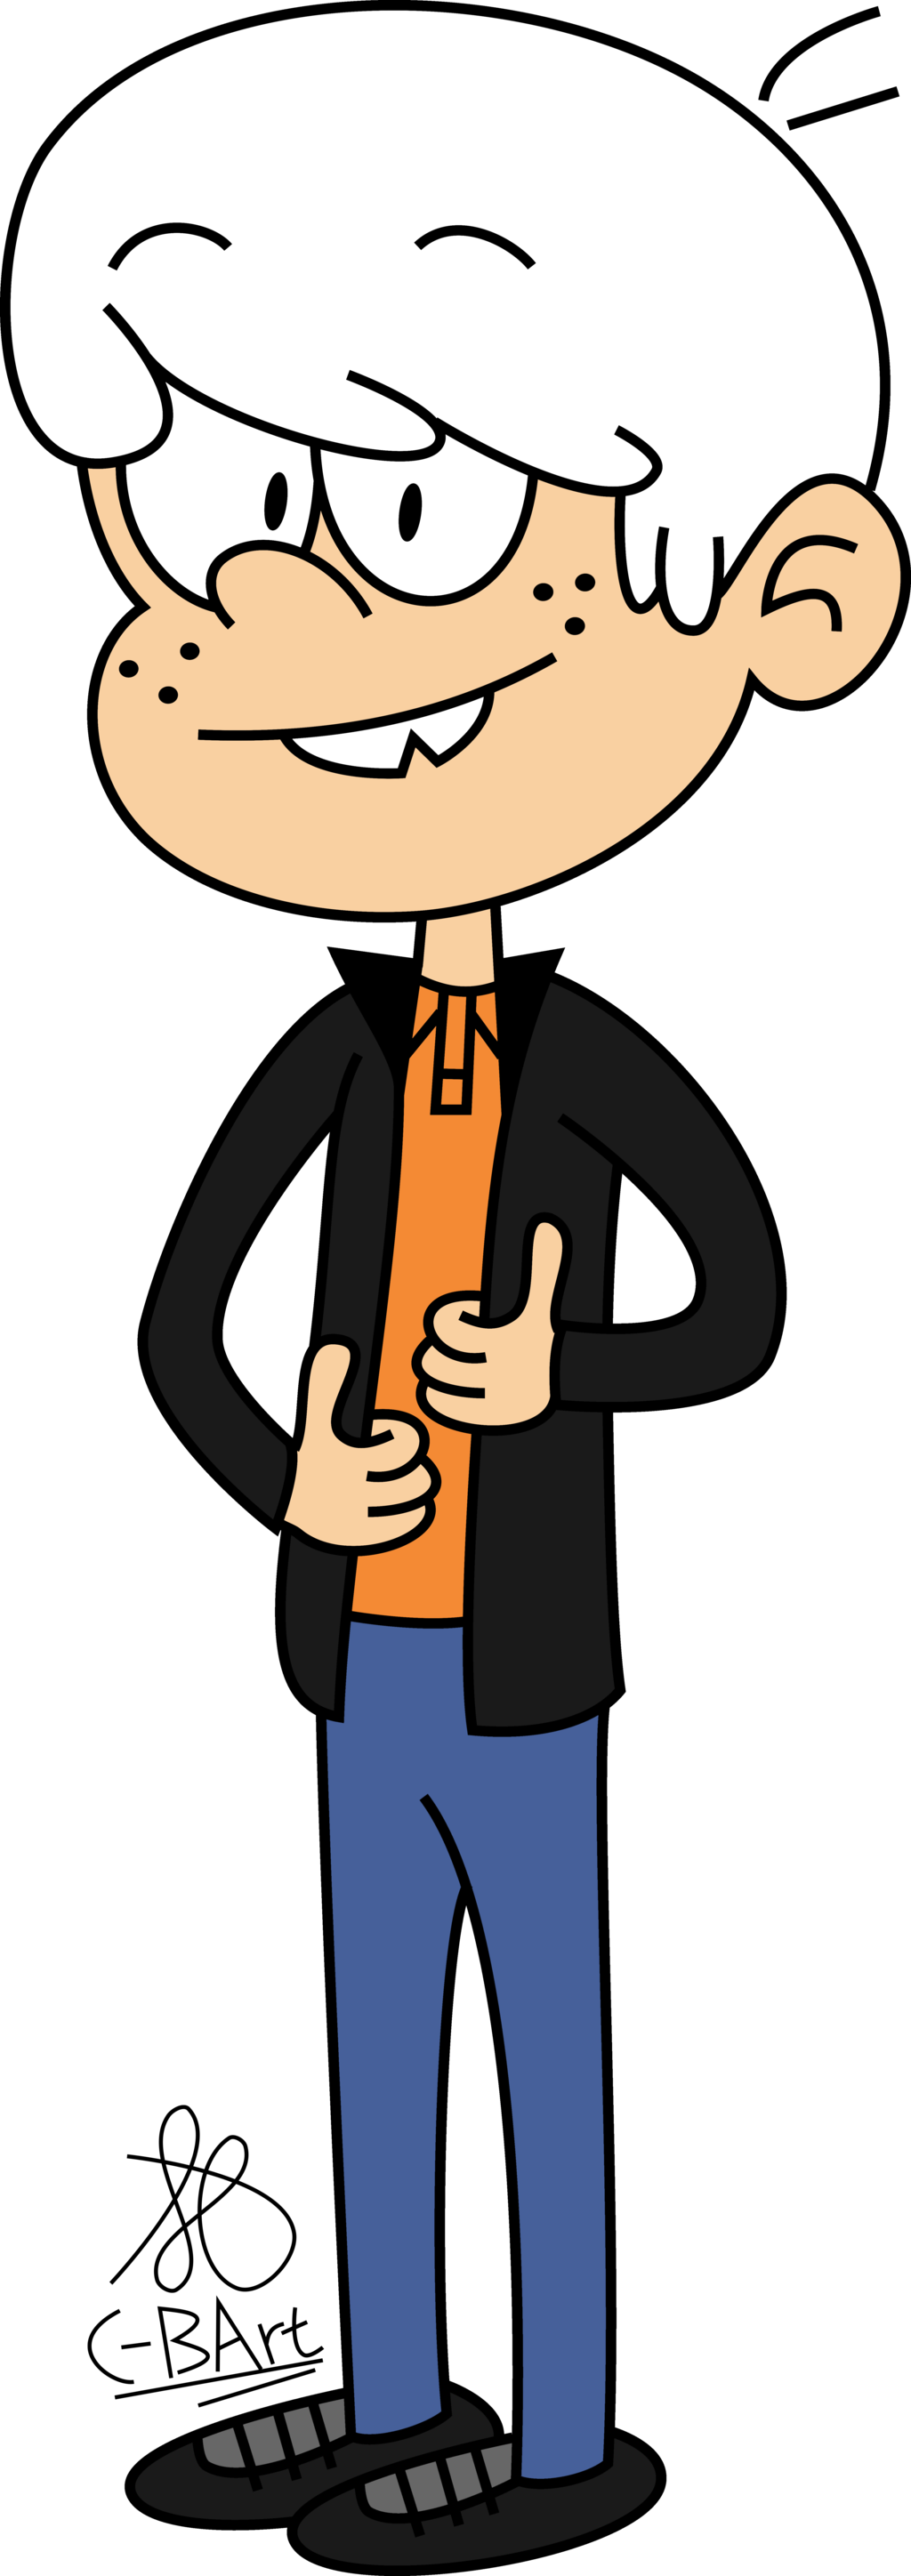 Lincoln Loud By C-bart - Lincoln Loud As A Teen (1024x2896)